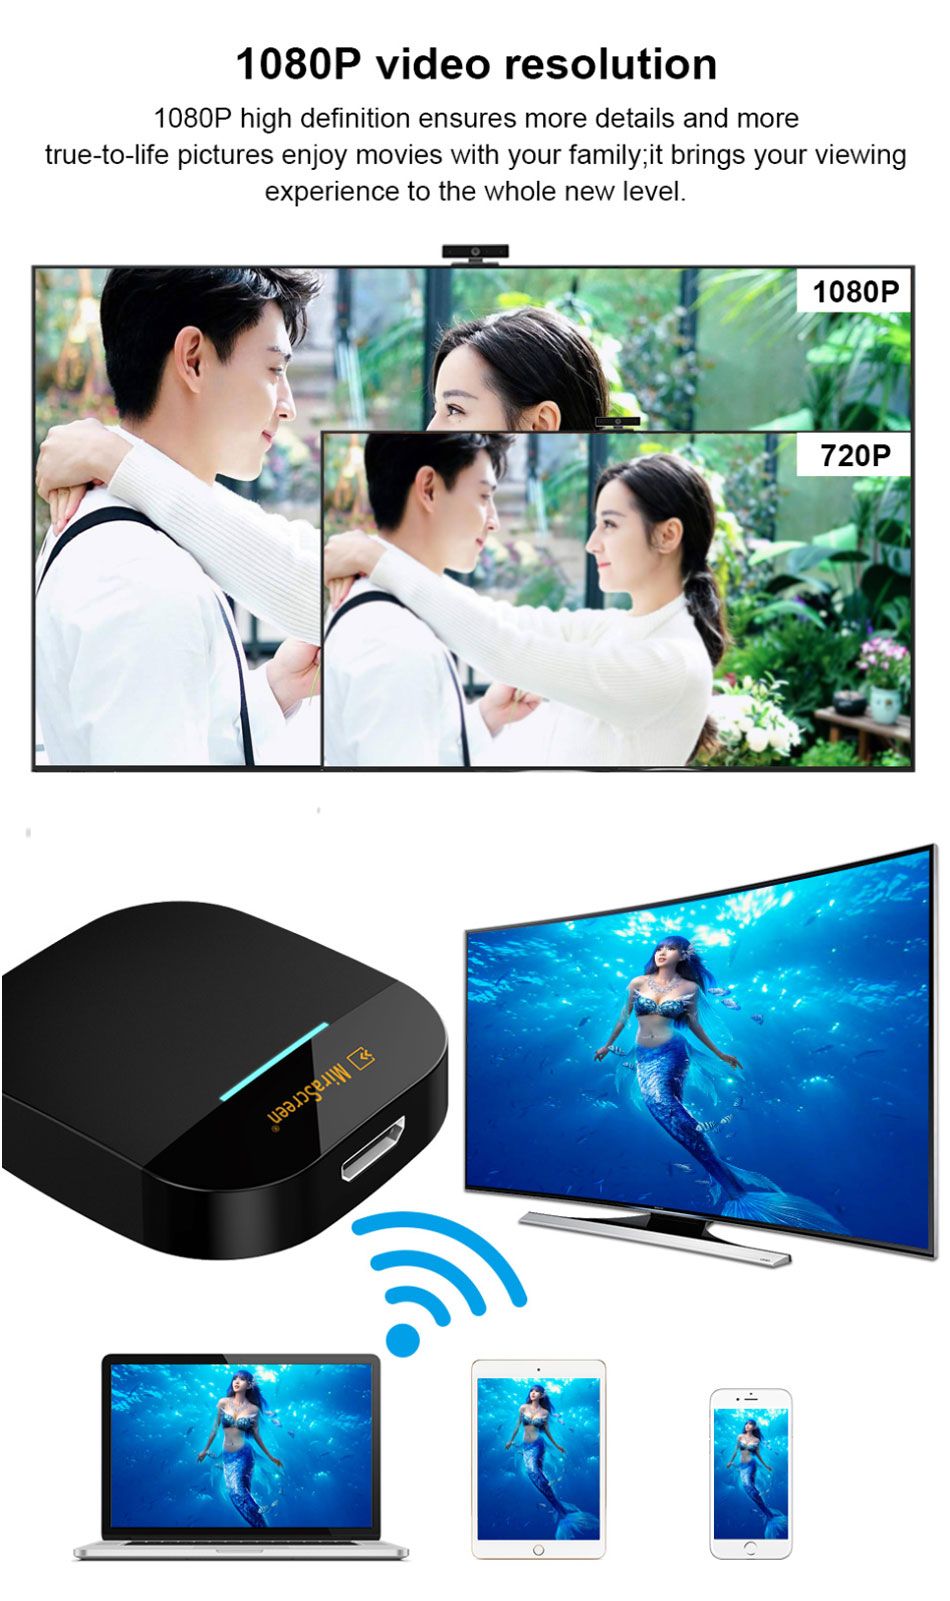 Mirascreen-G5-24G-5G-Wireless-1080P-HD-Display-Dongle-TV-Stick-for-Air-Play-DLNA-Miracast-1553548